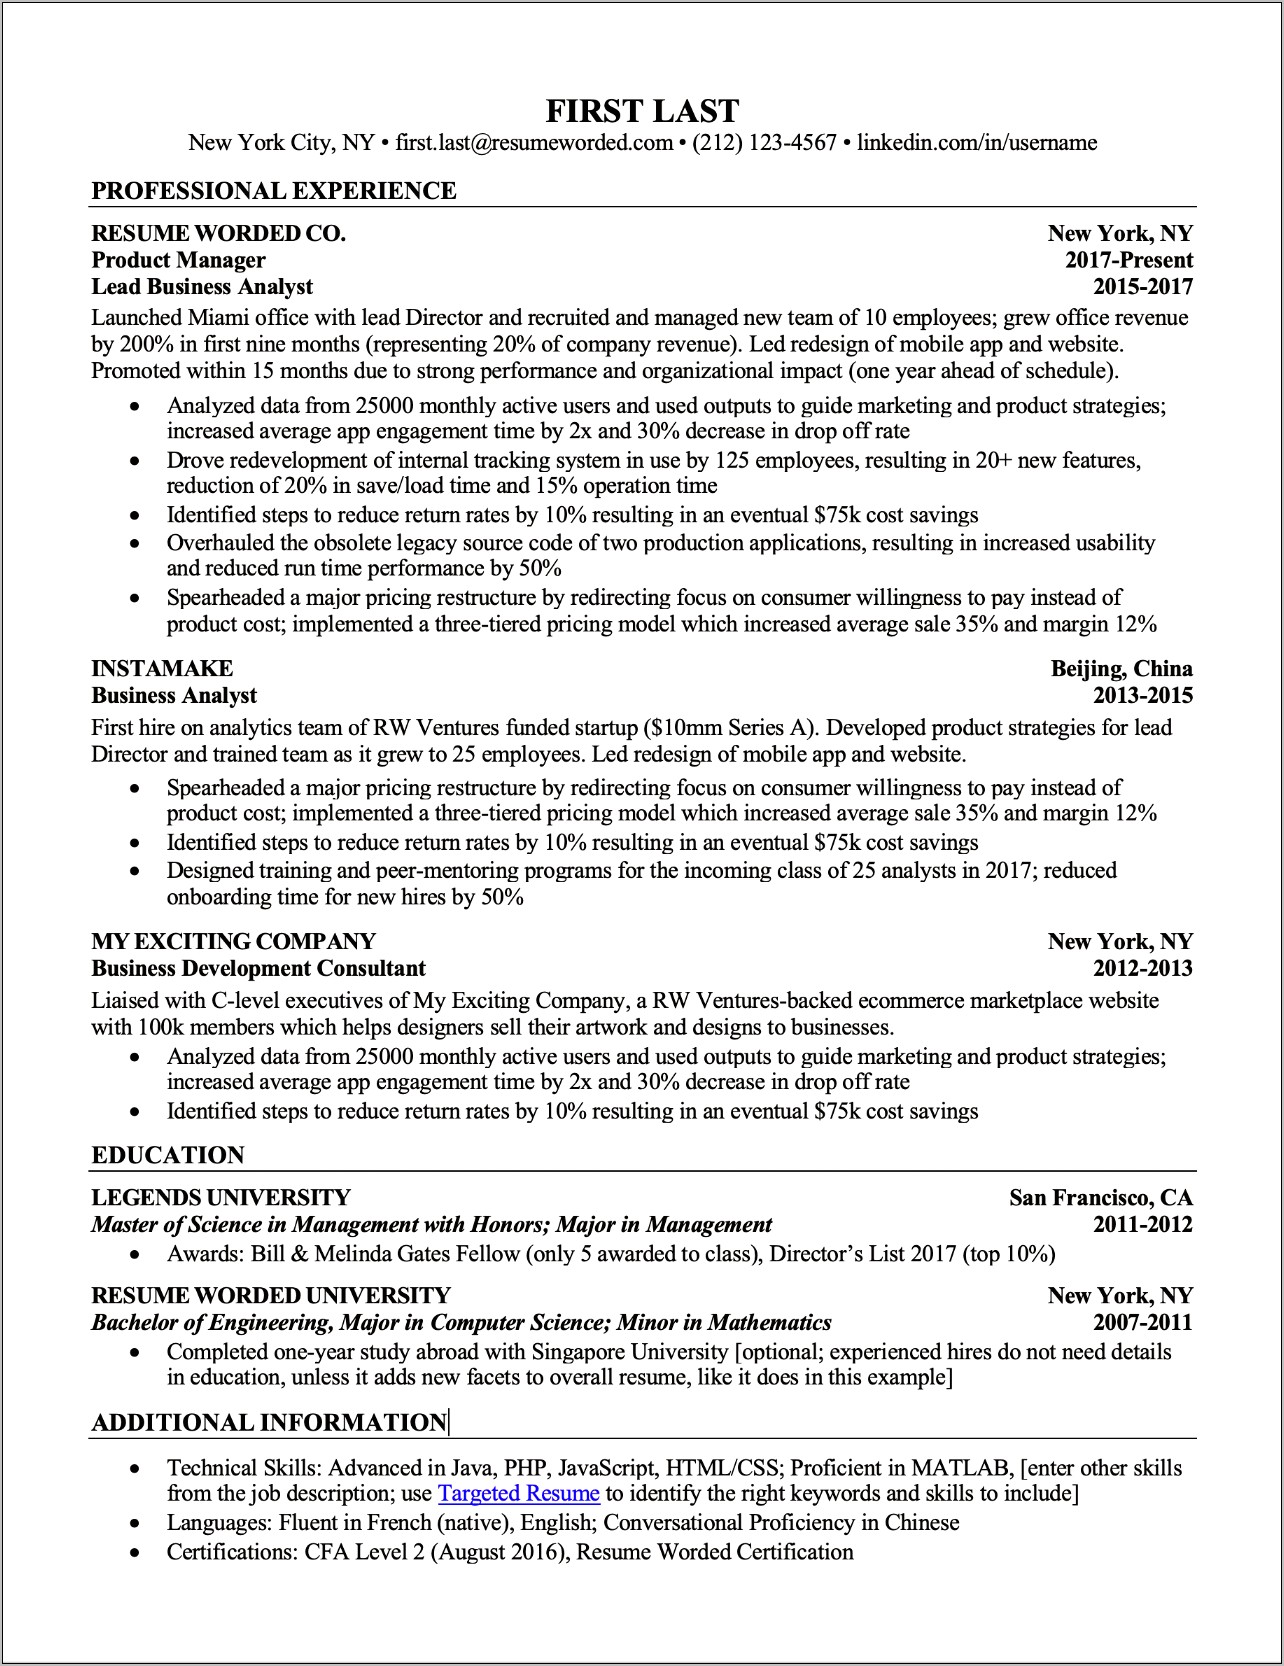 Bullets Or Summary Paragraphs For Professional Resume